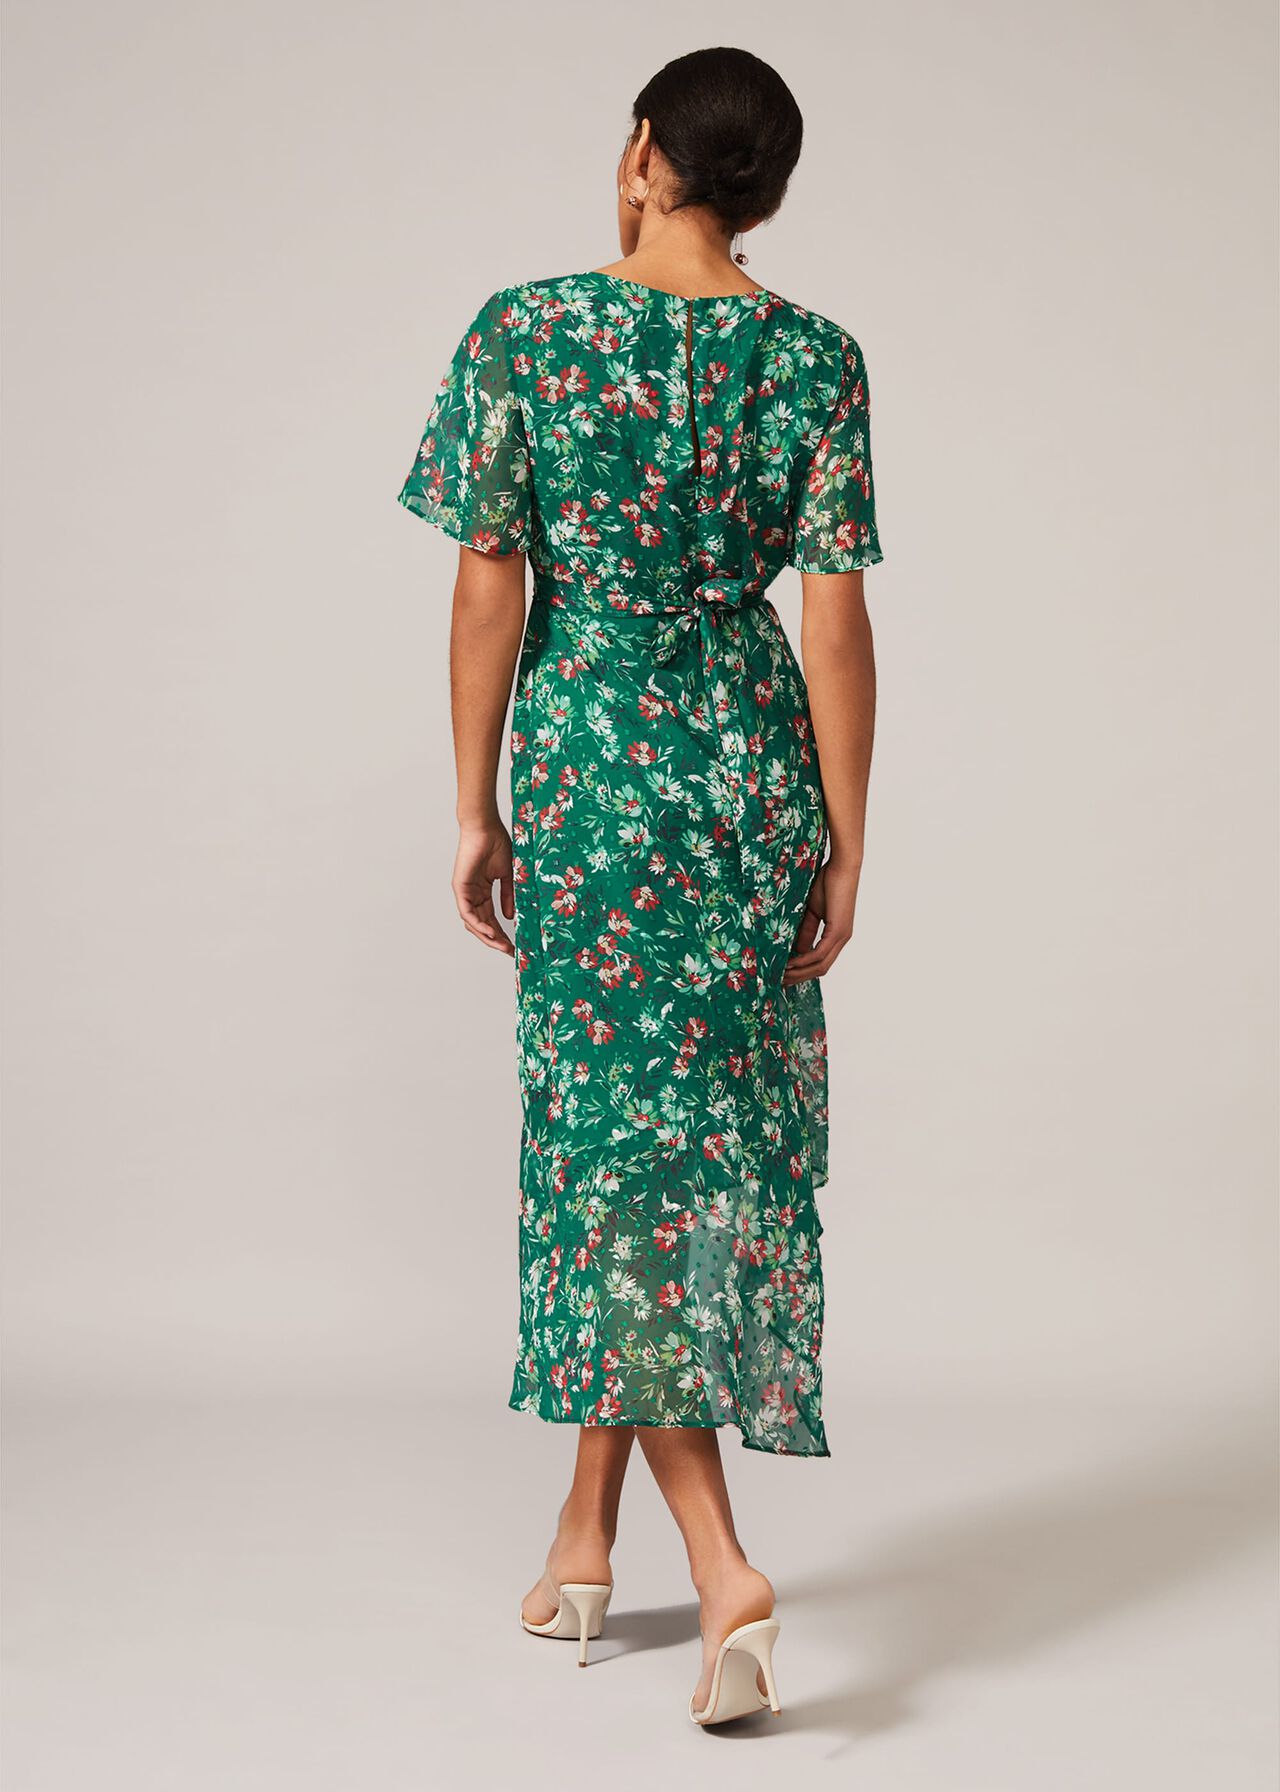 Coralee Textured Floral Dress | Phase Eight